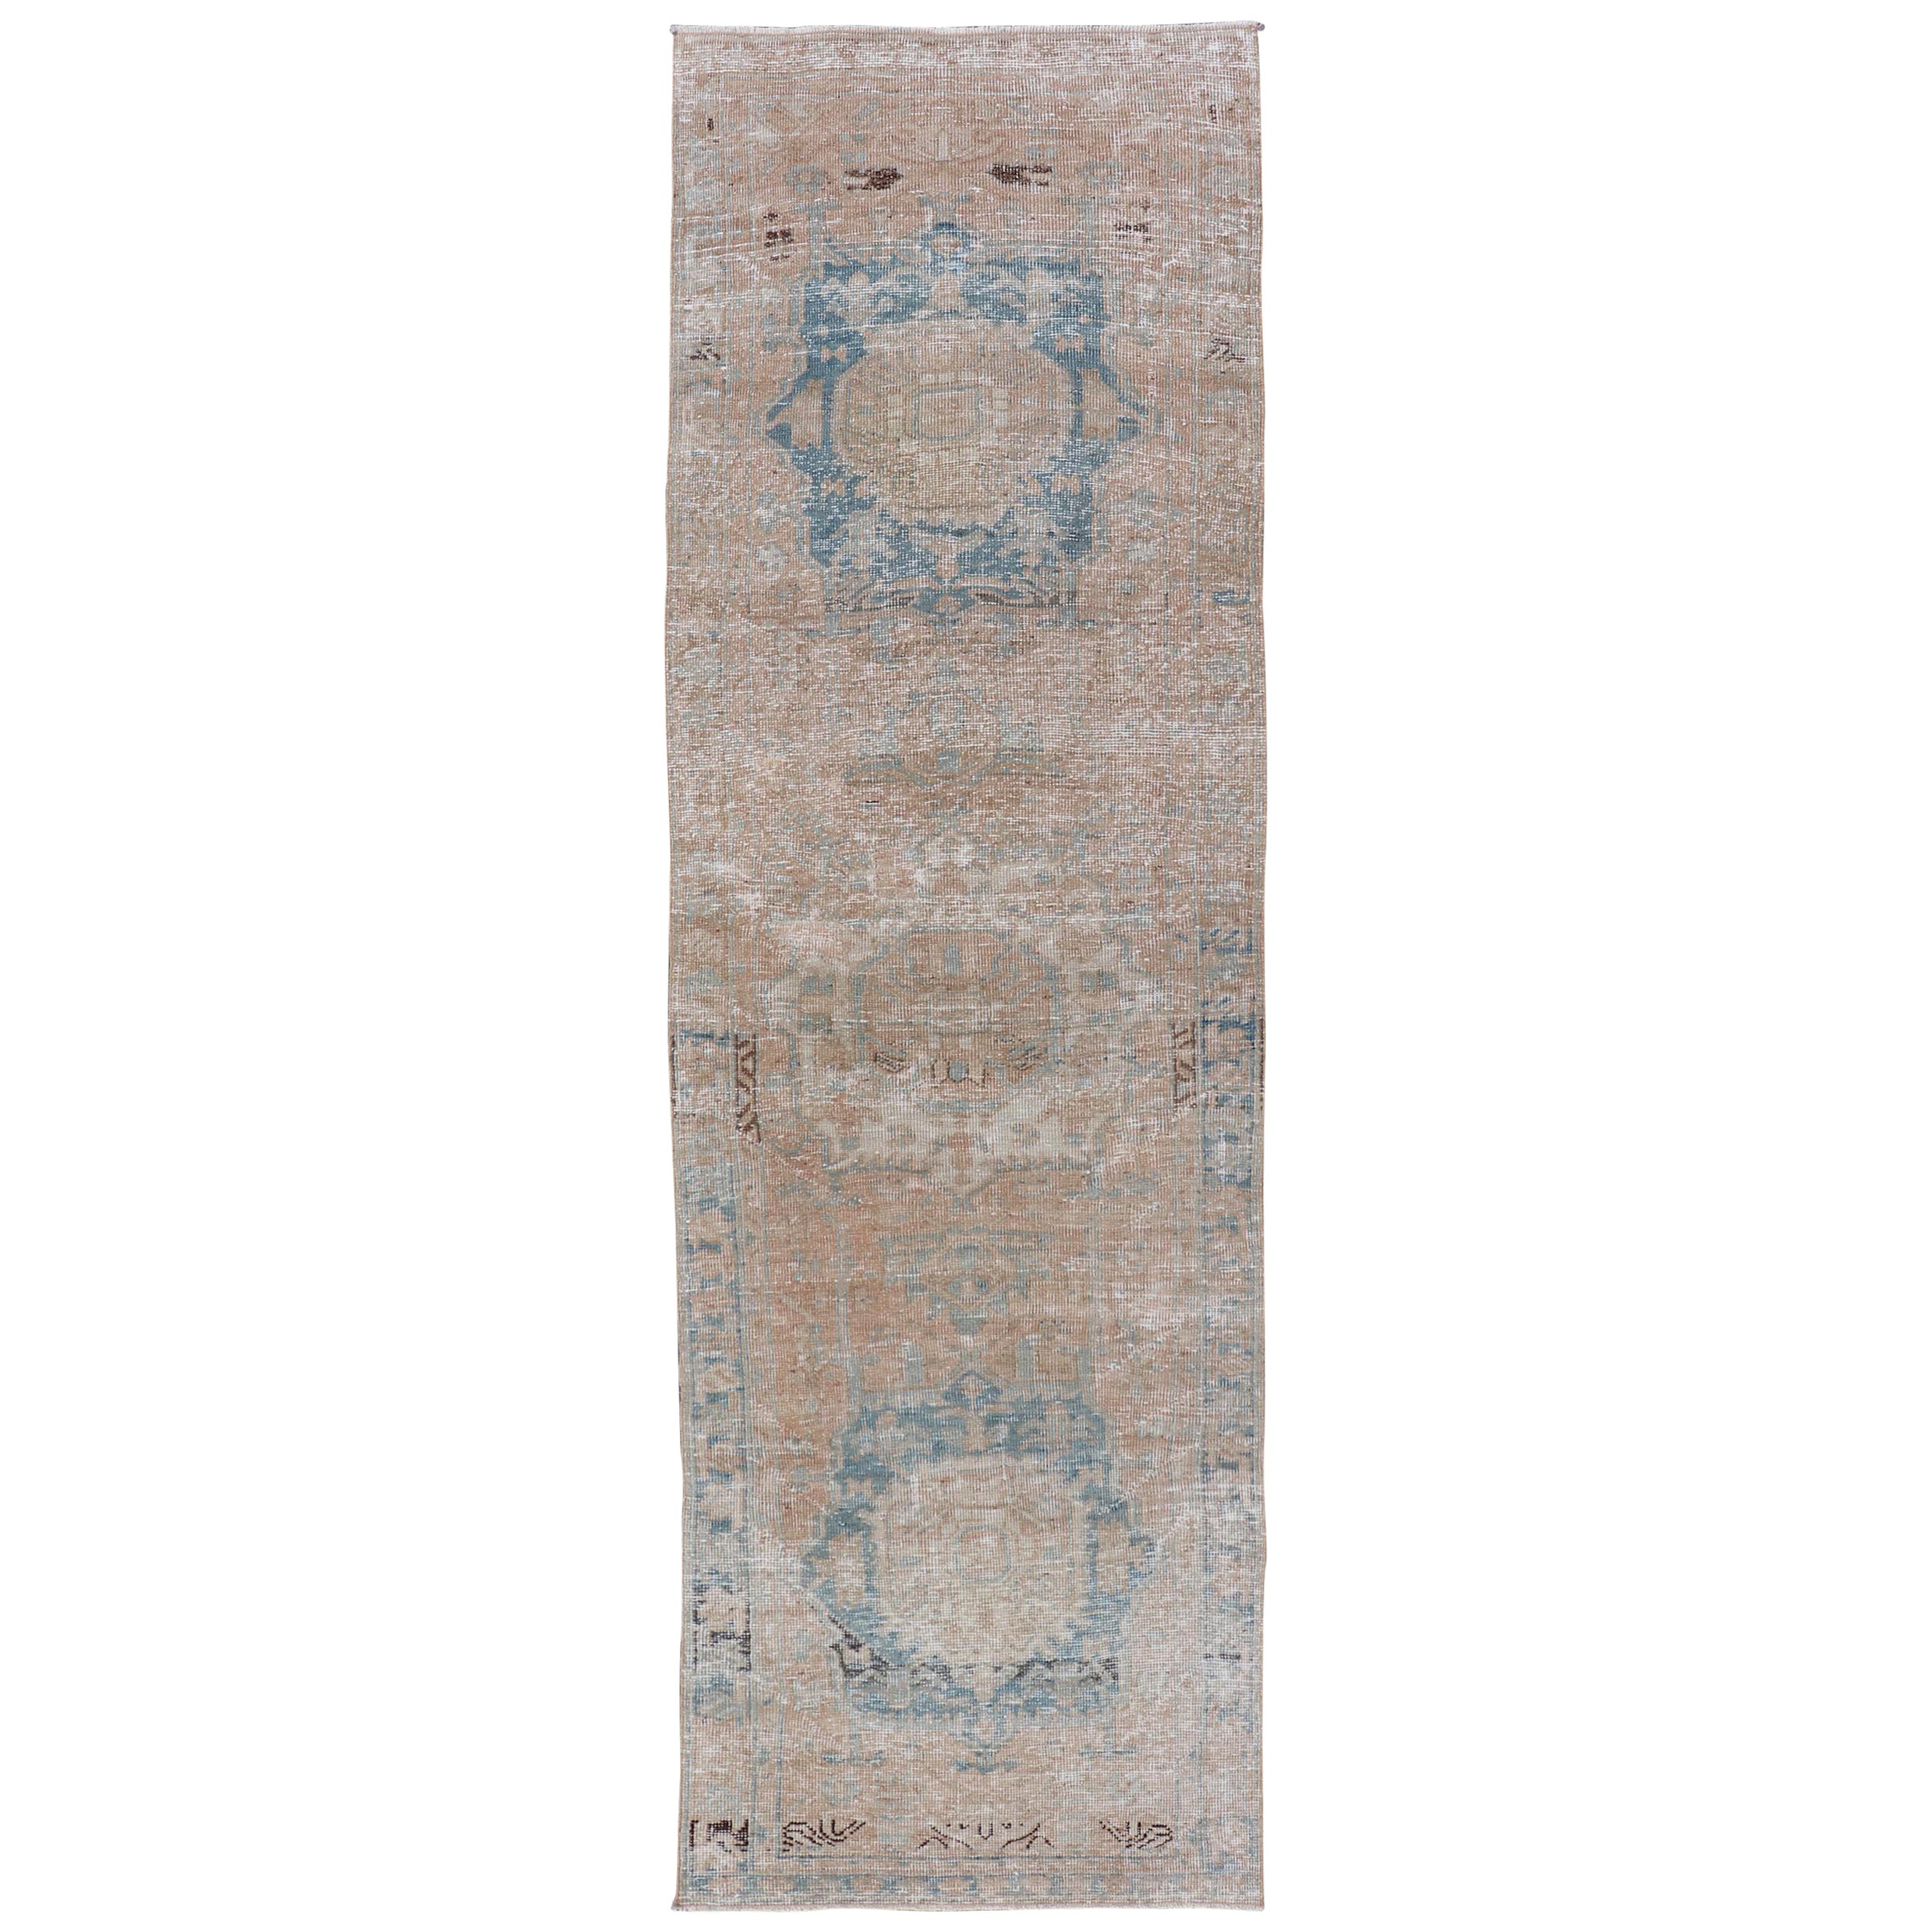 Vintage Persian Heriz Runner with Medallions in Earthy Tones and Light Blue